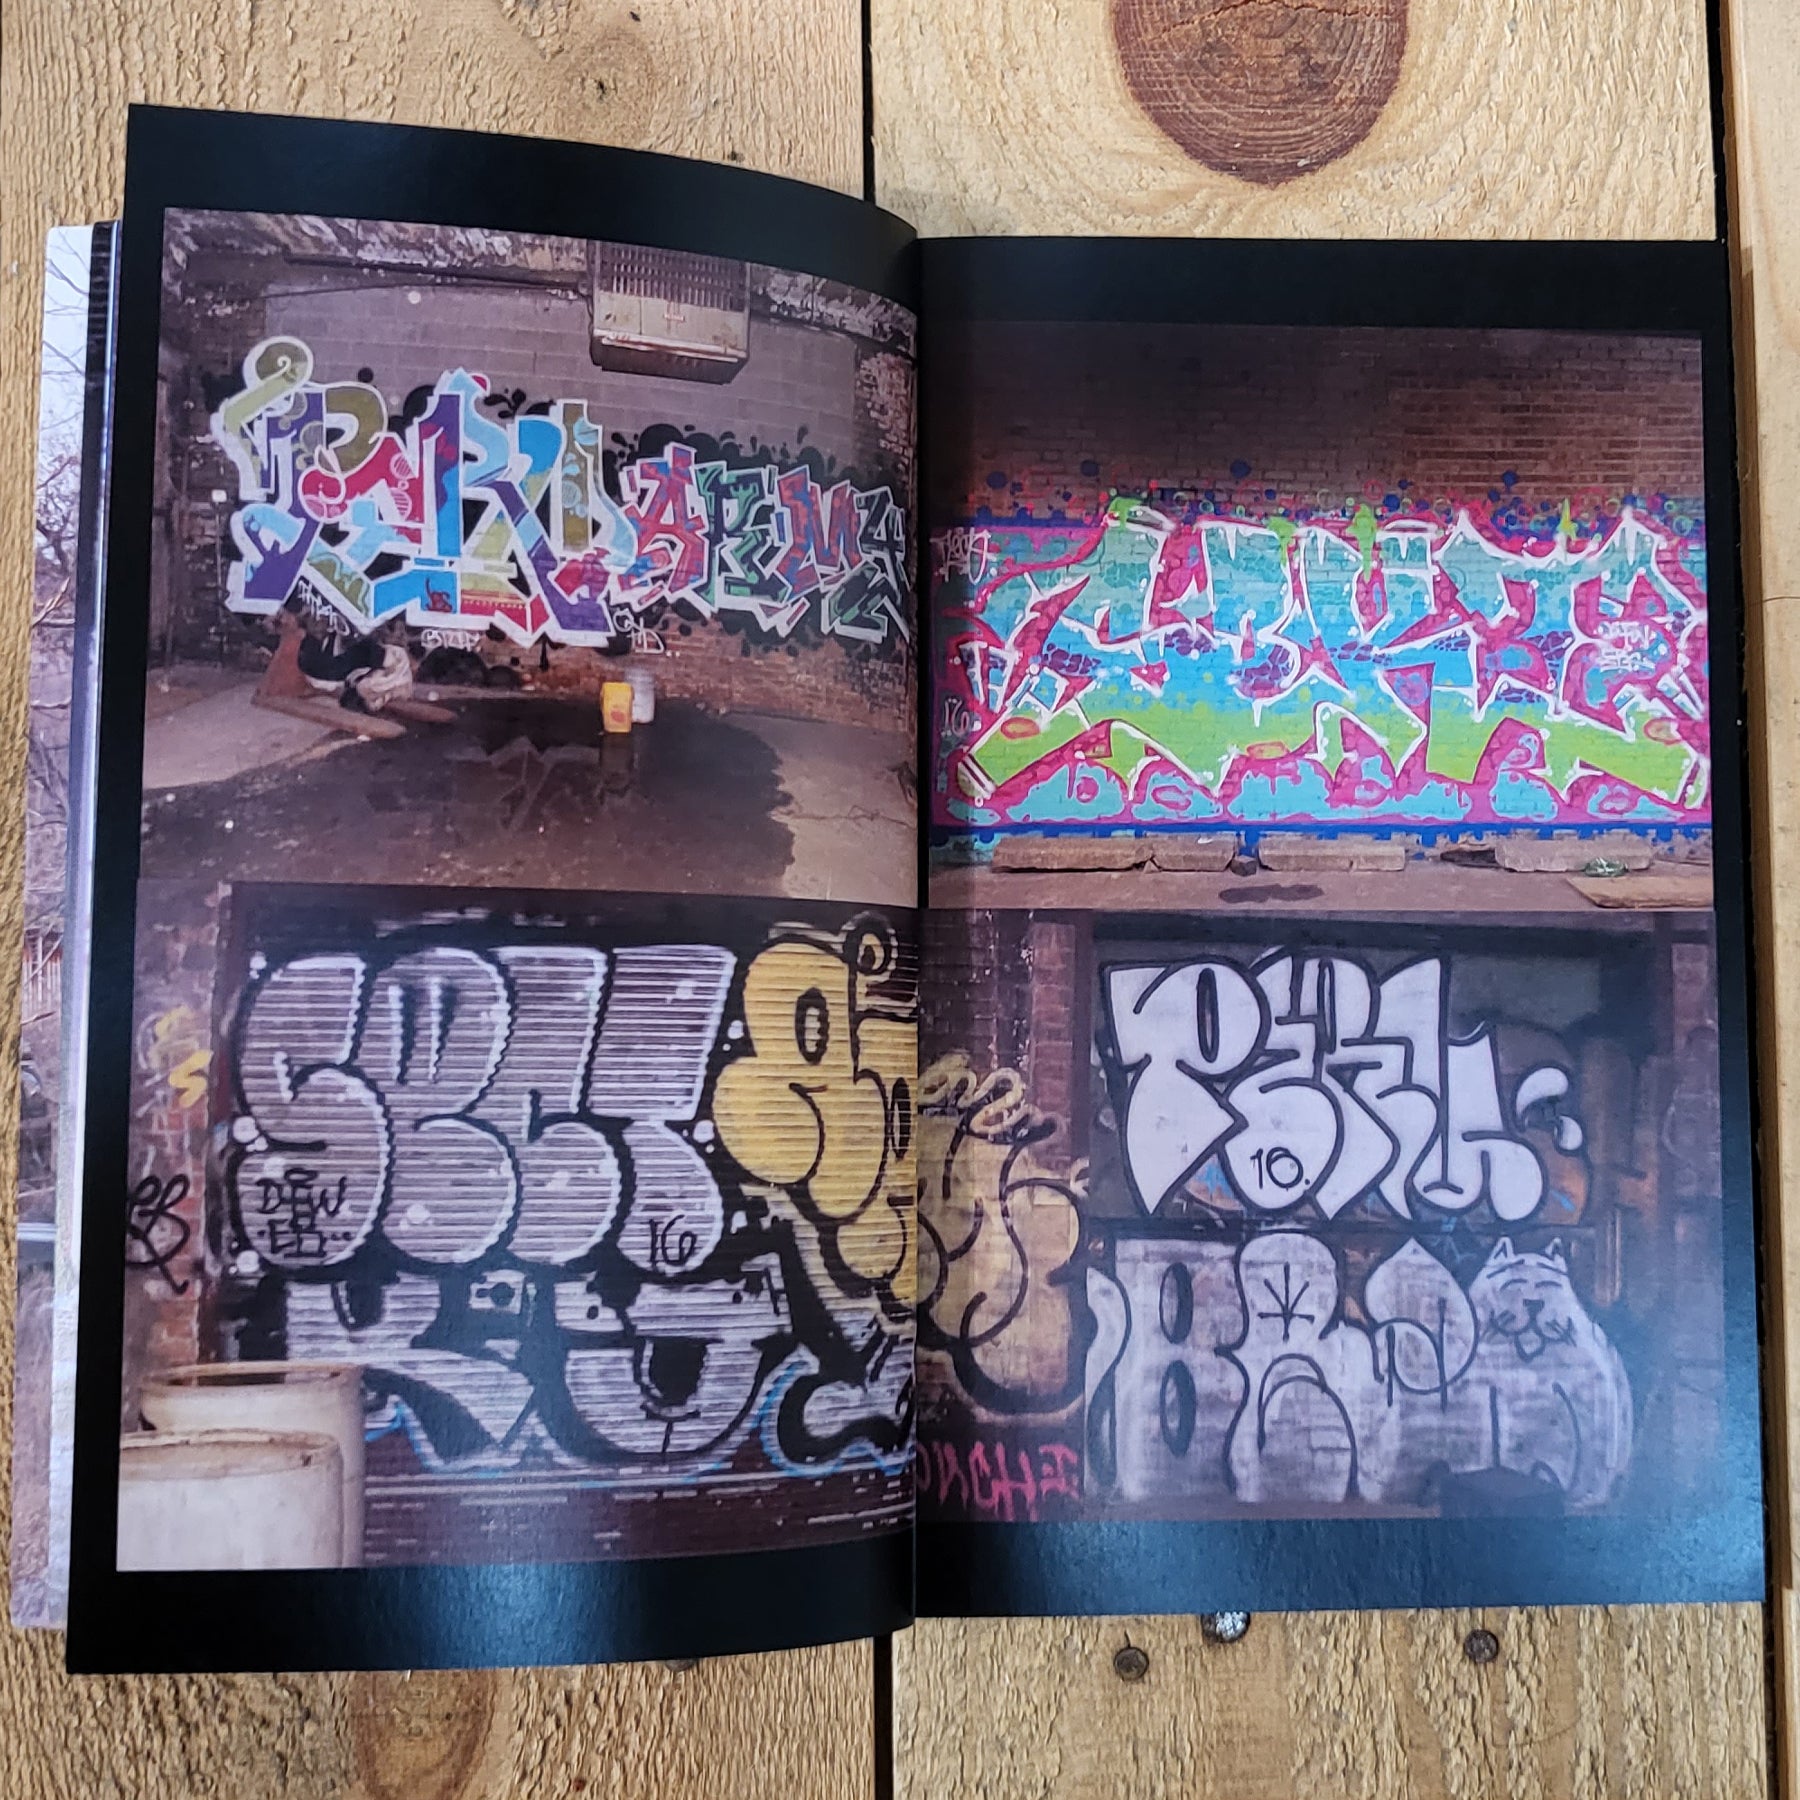 An open magazine, the left and right pages show two photos of graffiti, one on top of the other.